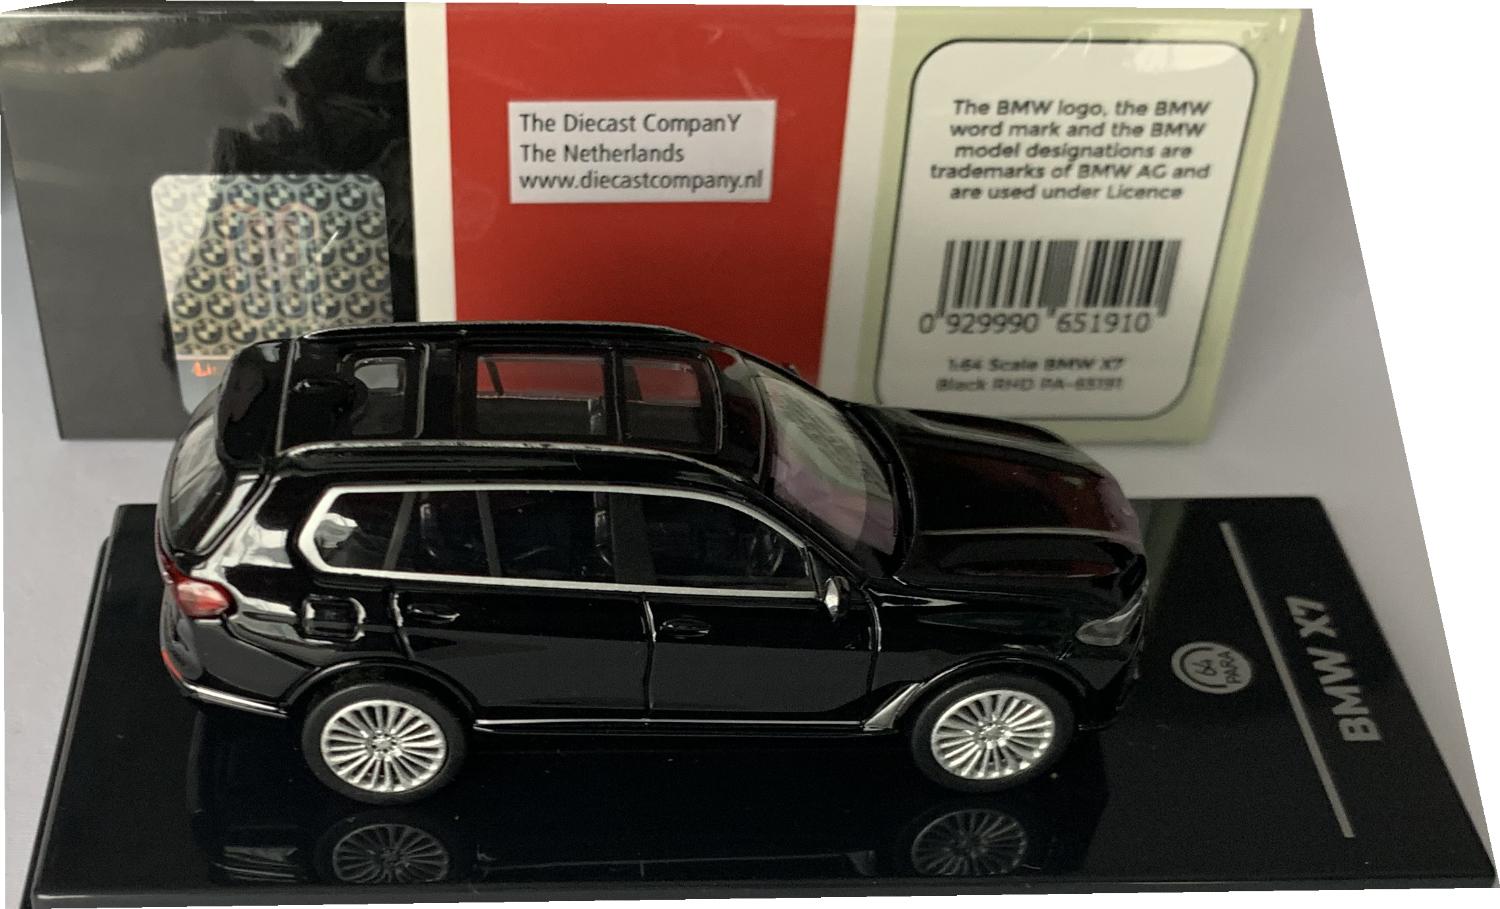 BMW X7 in black 1:64 scale model from Paragon Models